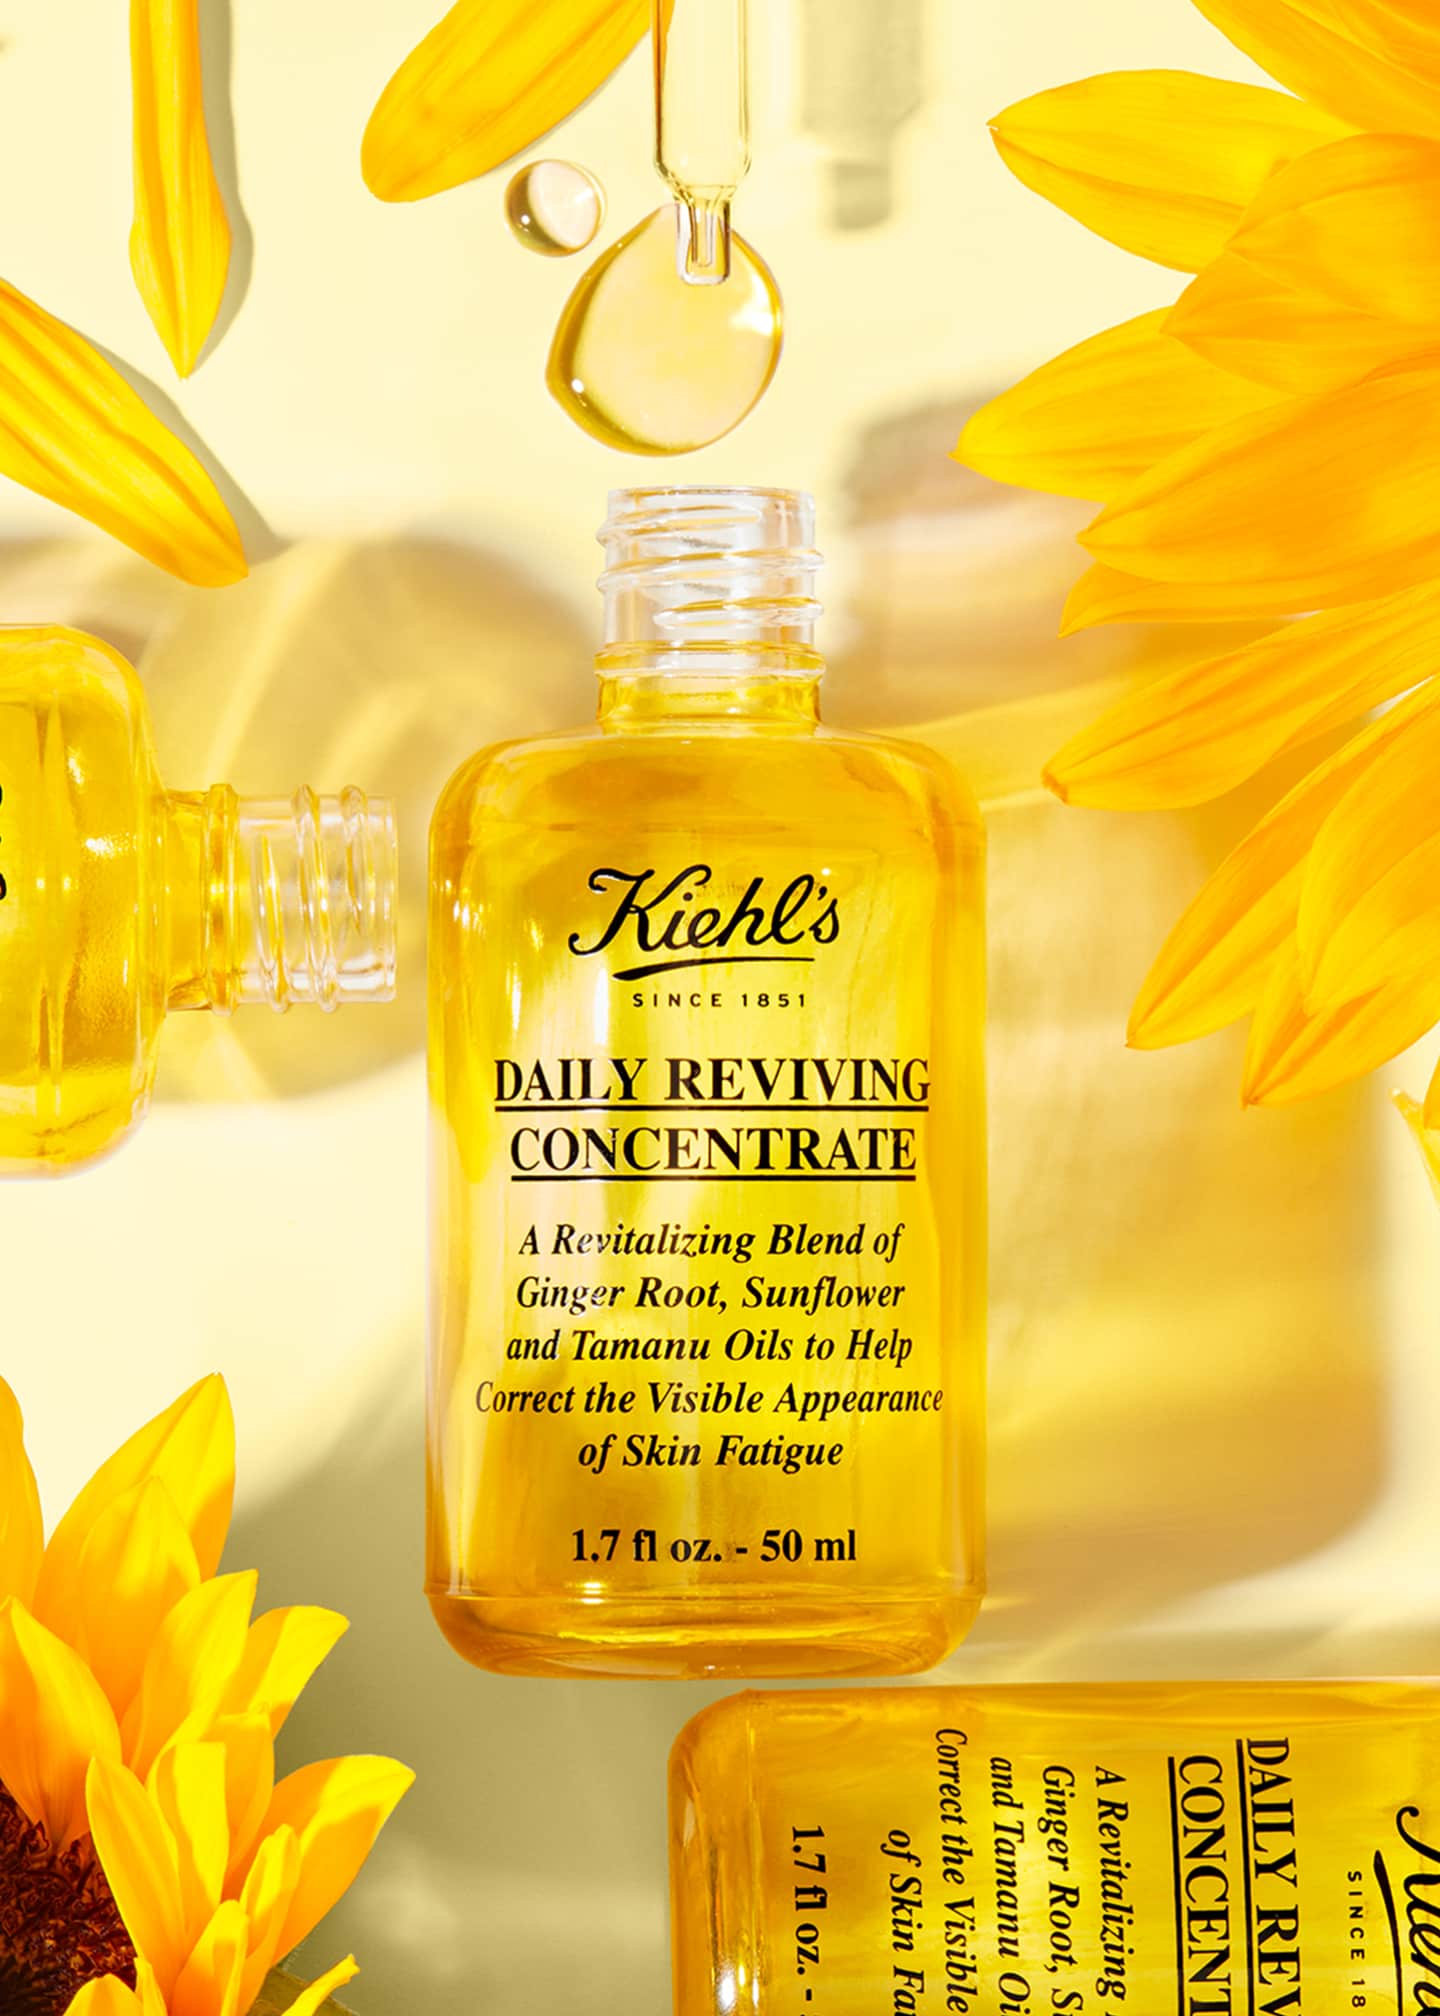 Kiehl's Since 1851 Daily Reviving Concentrate, 1.7 oz. Image 5 of 5